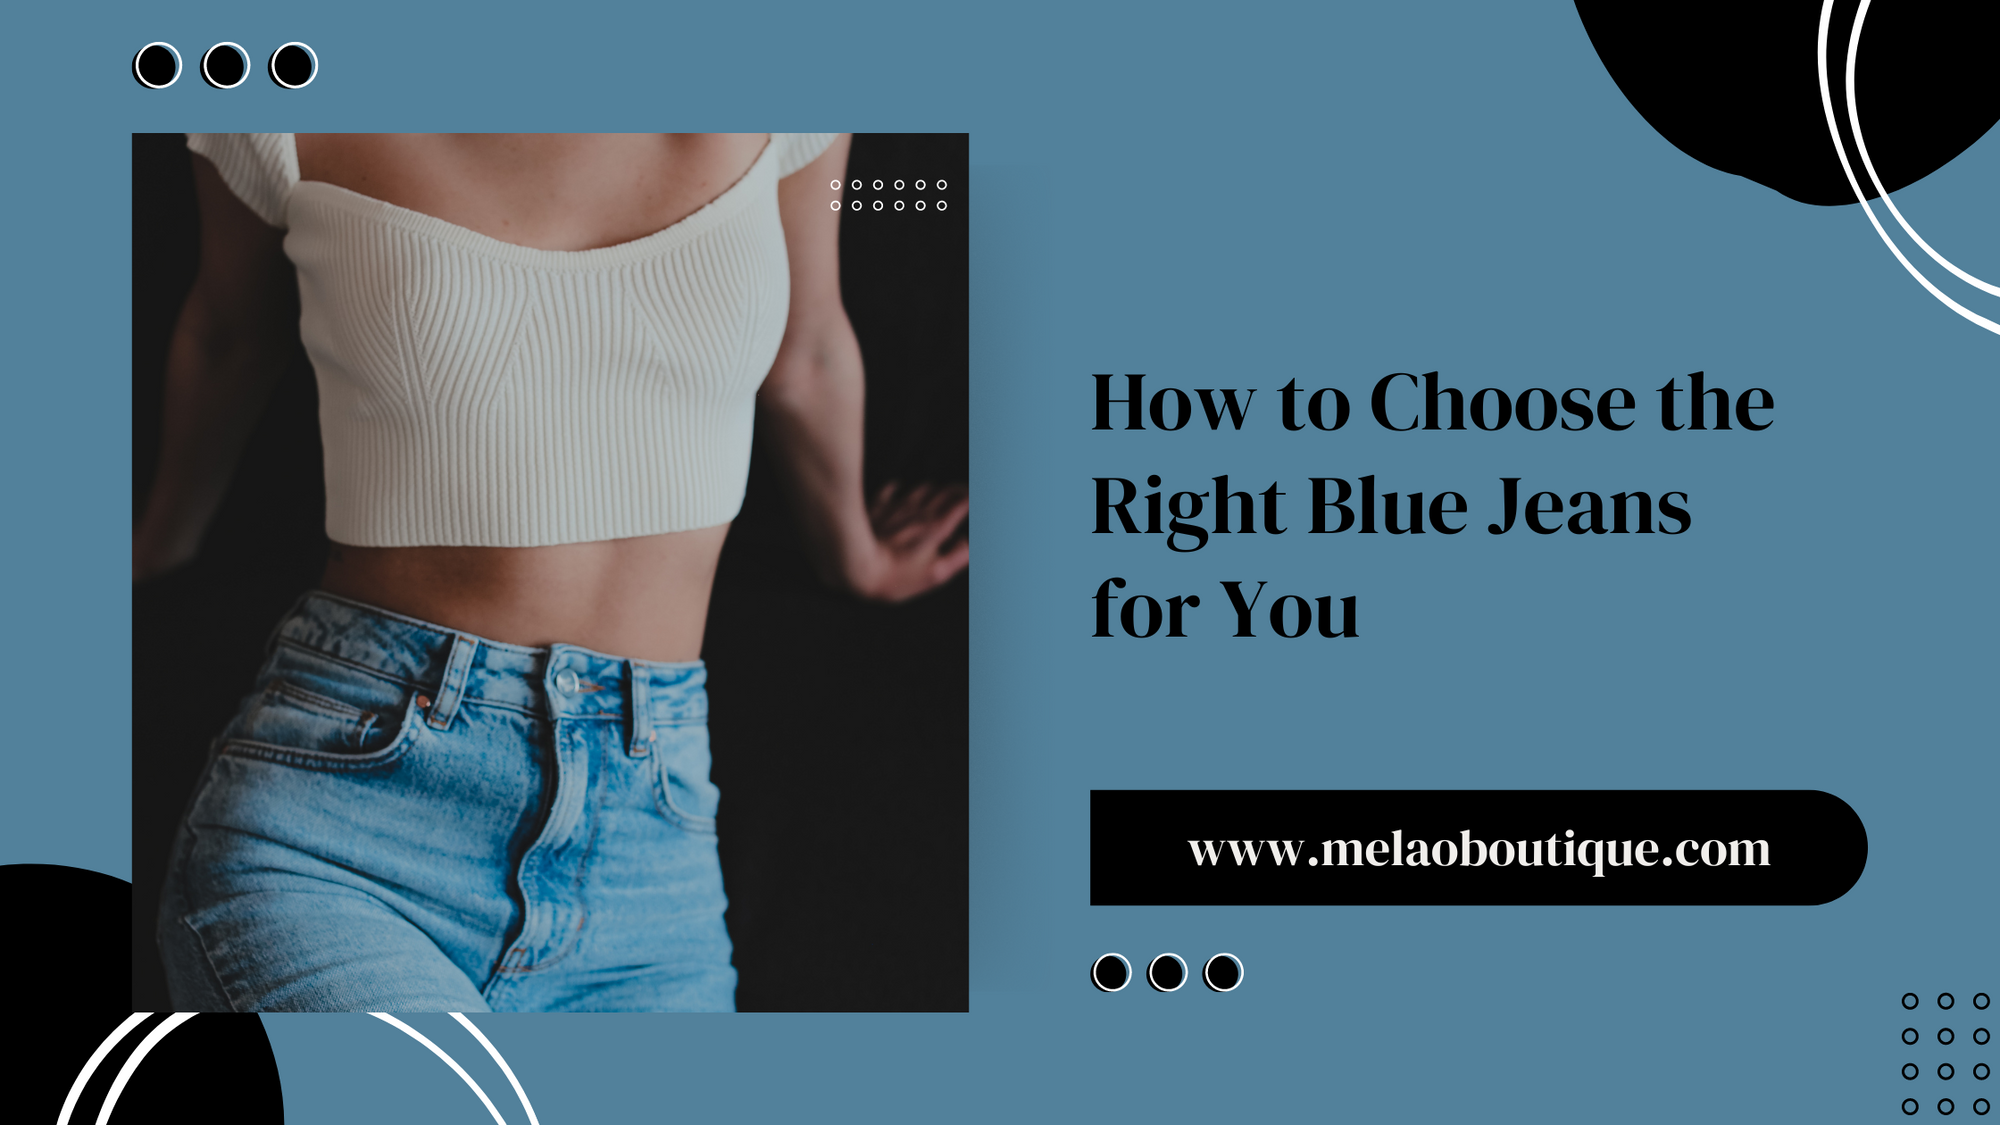 How to Choose the Right Blue Jeans for You